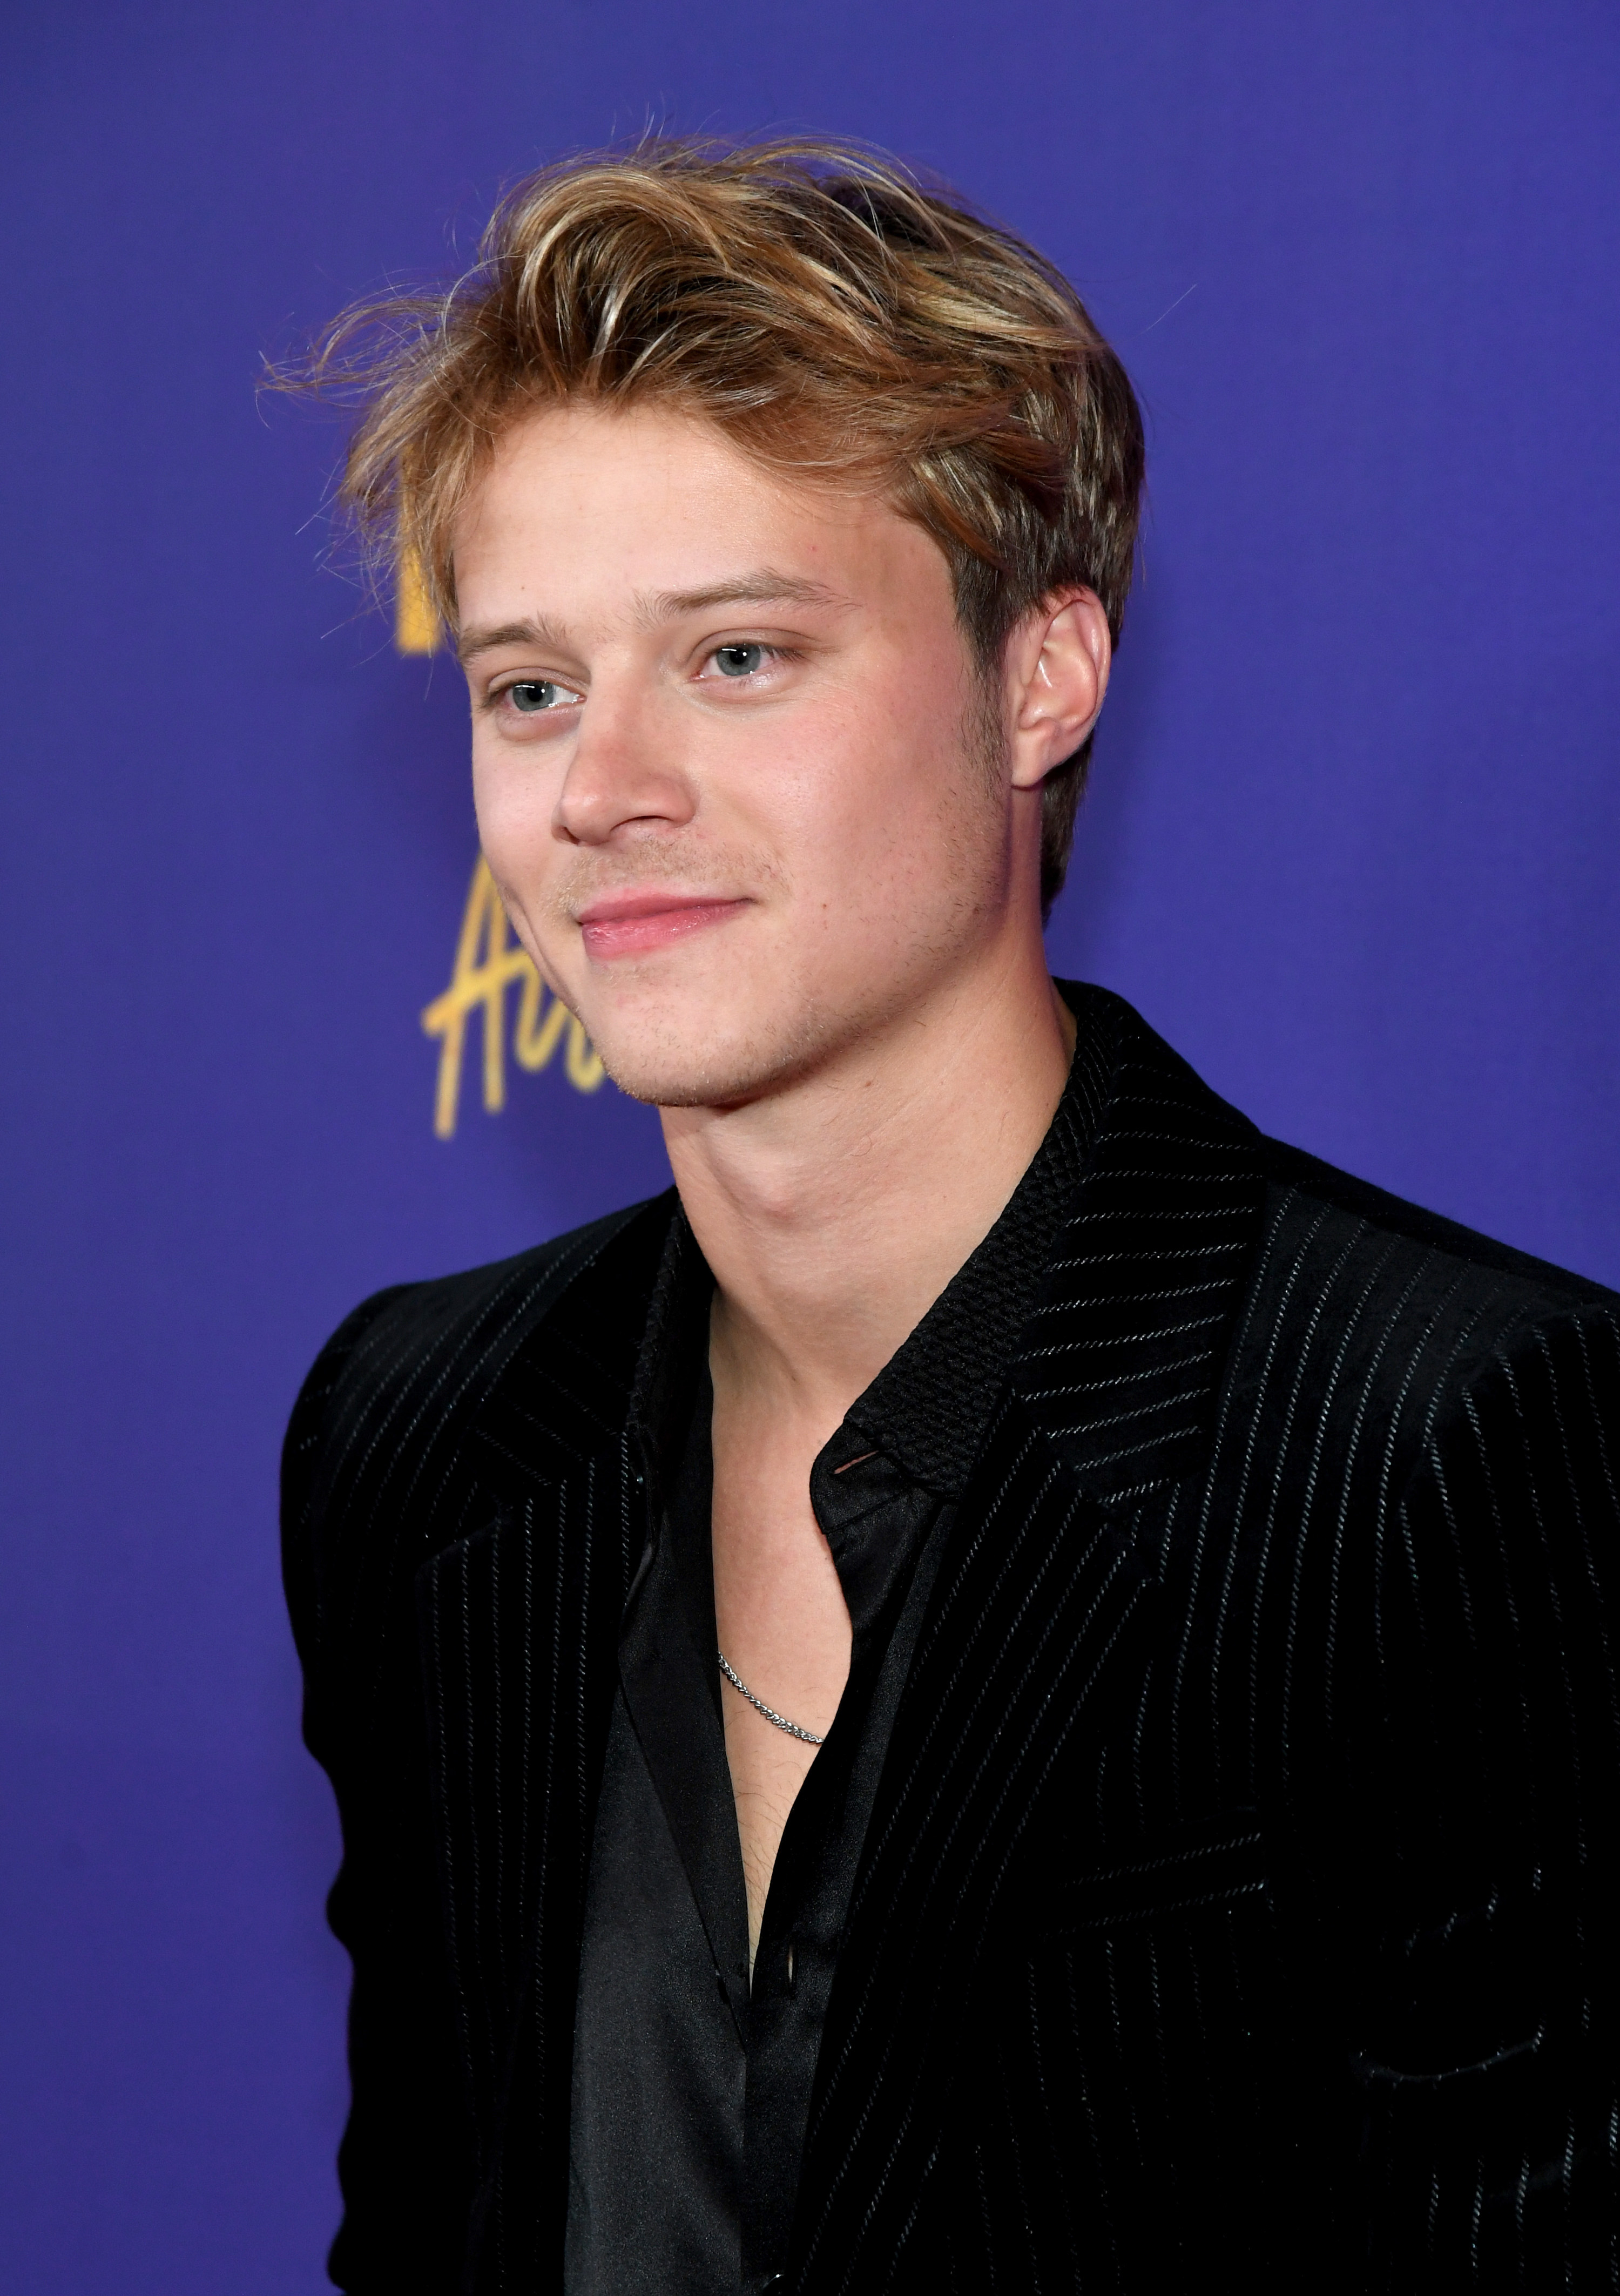 Rudy Pankow is photographed at the 2021 MTV Movie &amp; TV Awards